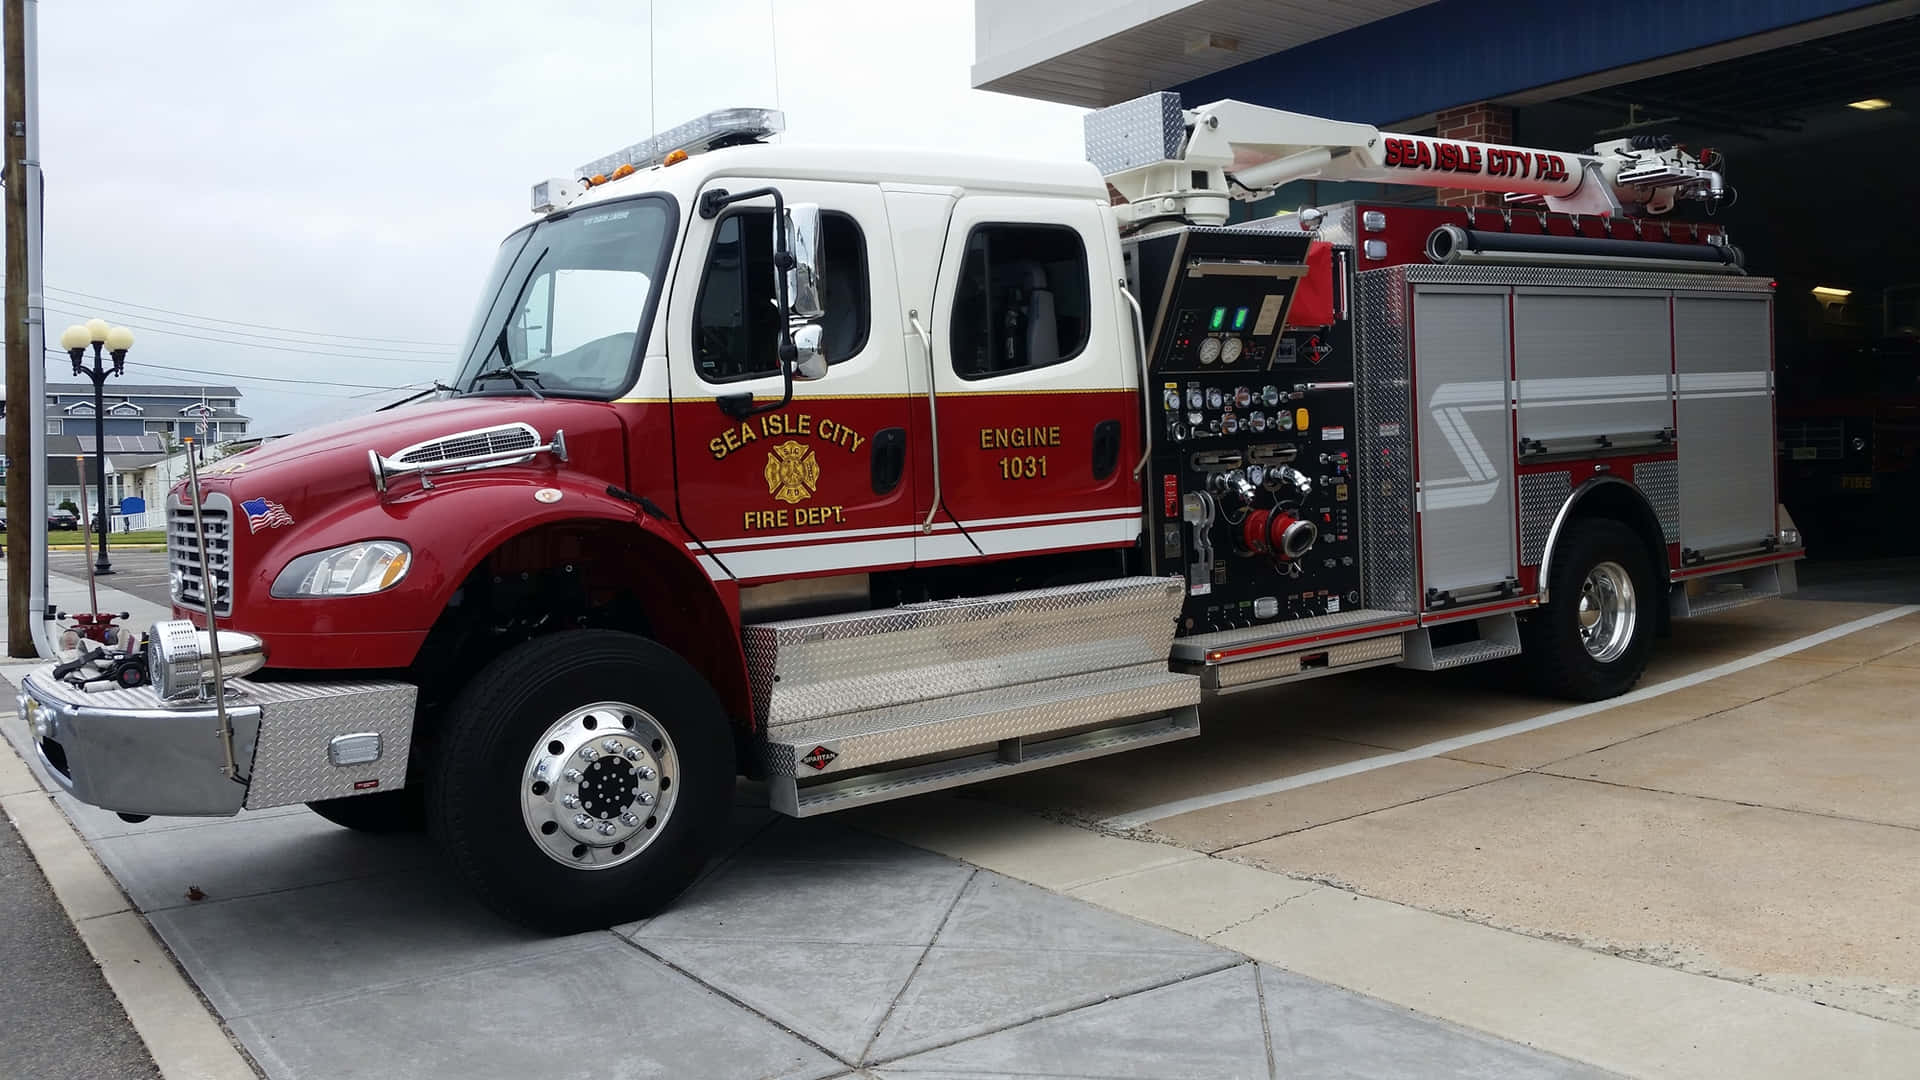 A Fire Truck Parked In Front Of A Building